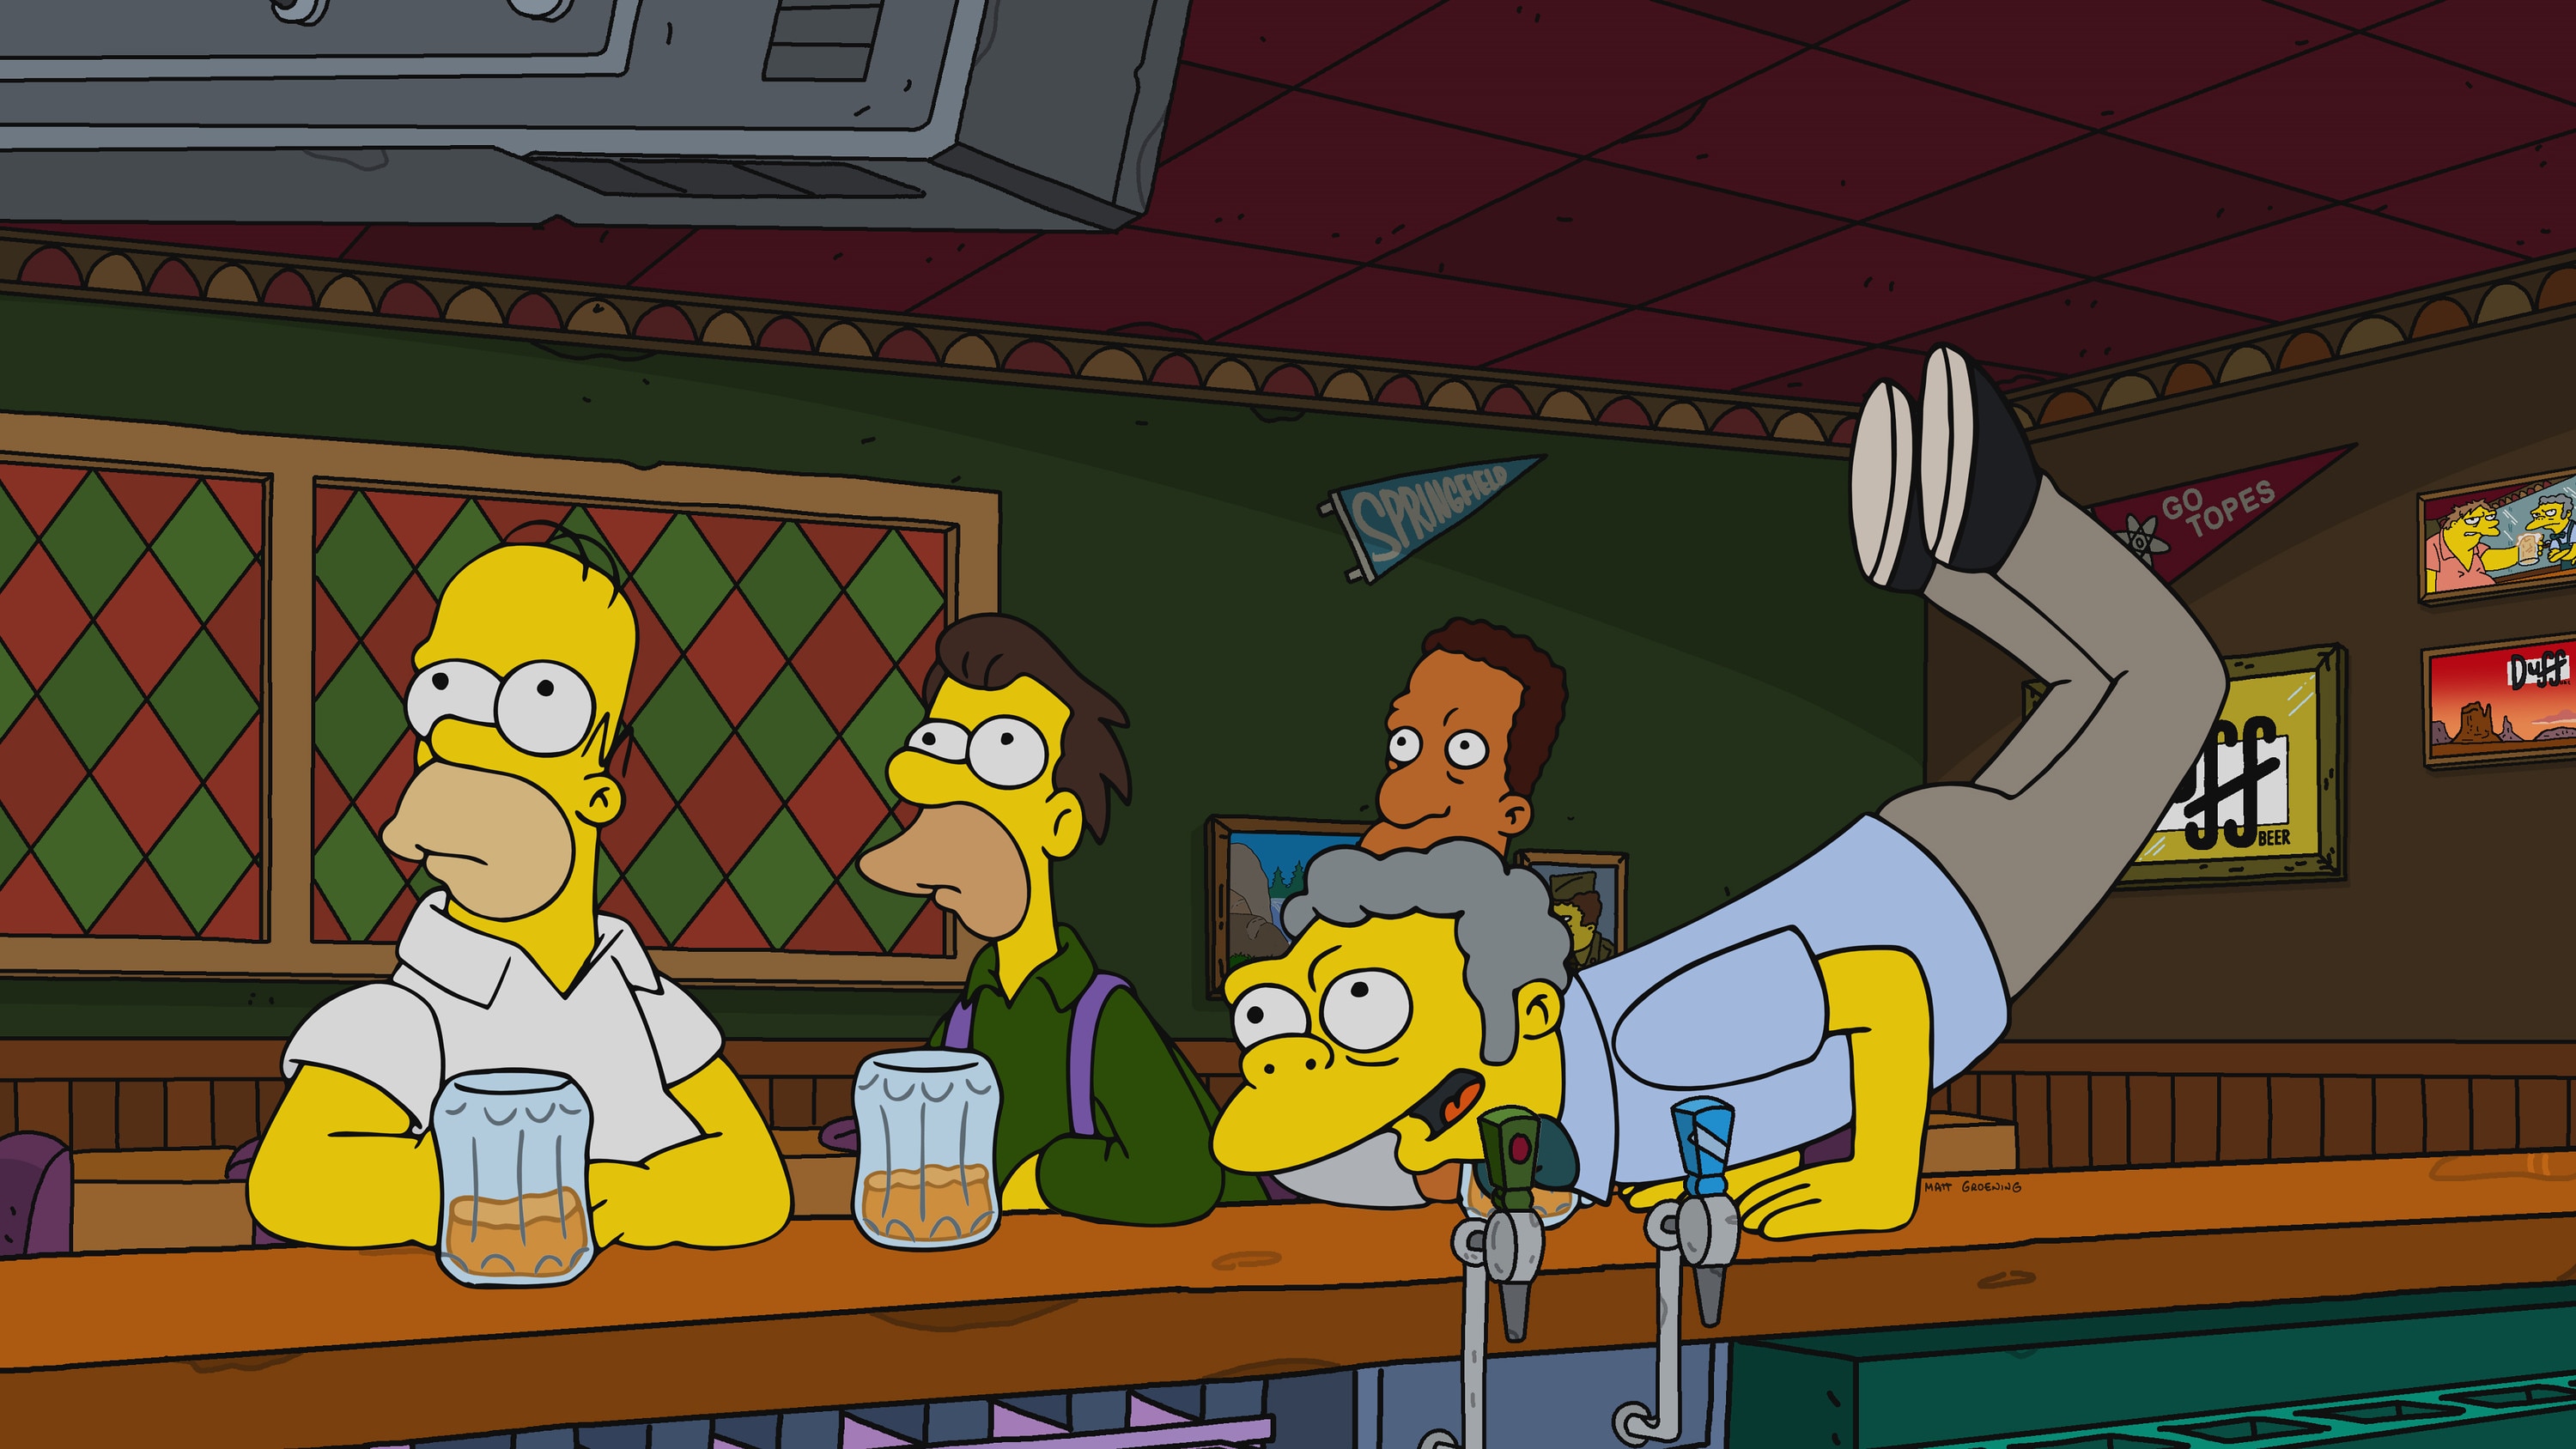 The Simpsons Season 35 Shocker: Executive Producer Tim Long Apologizes for Heartrending Character Death